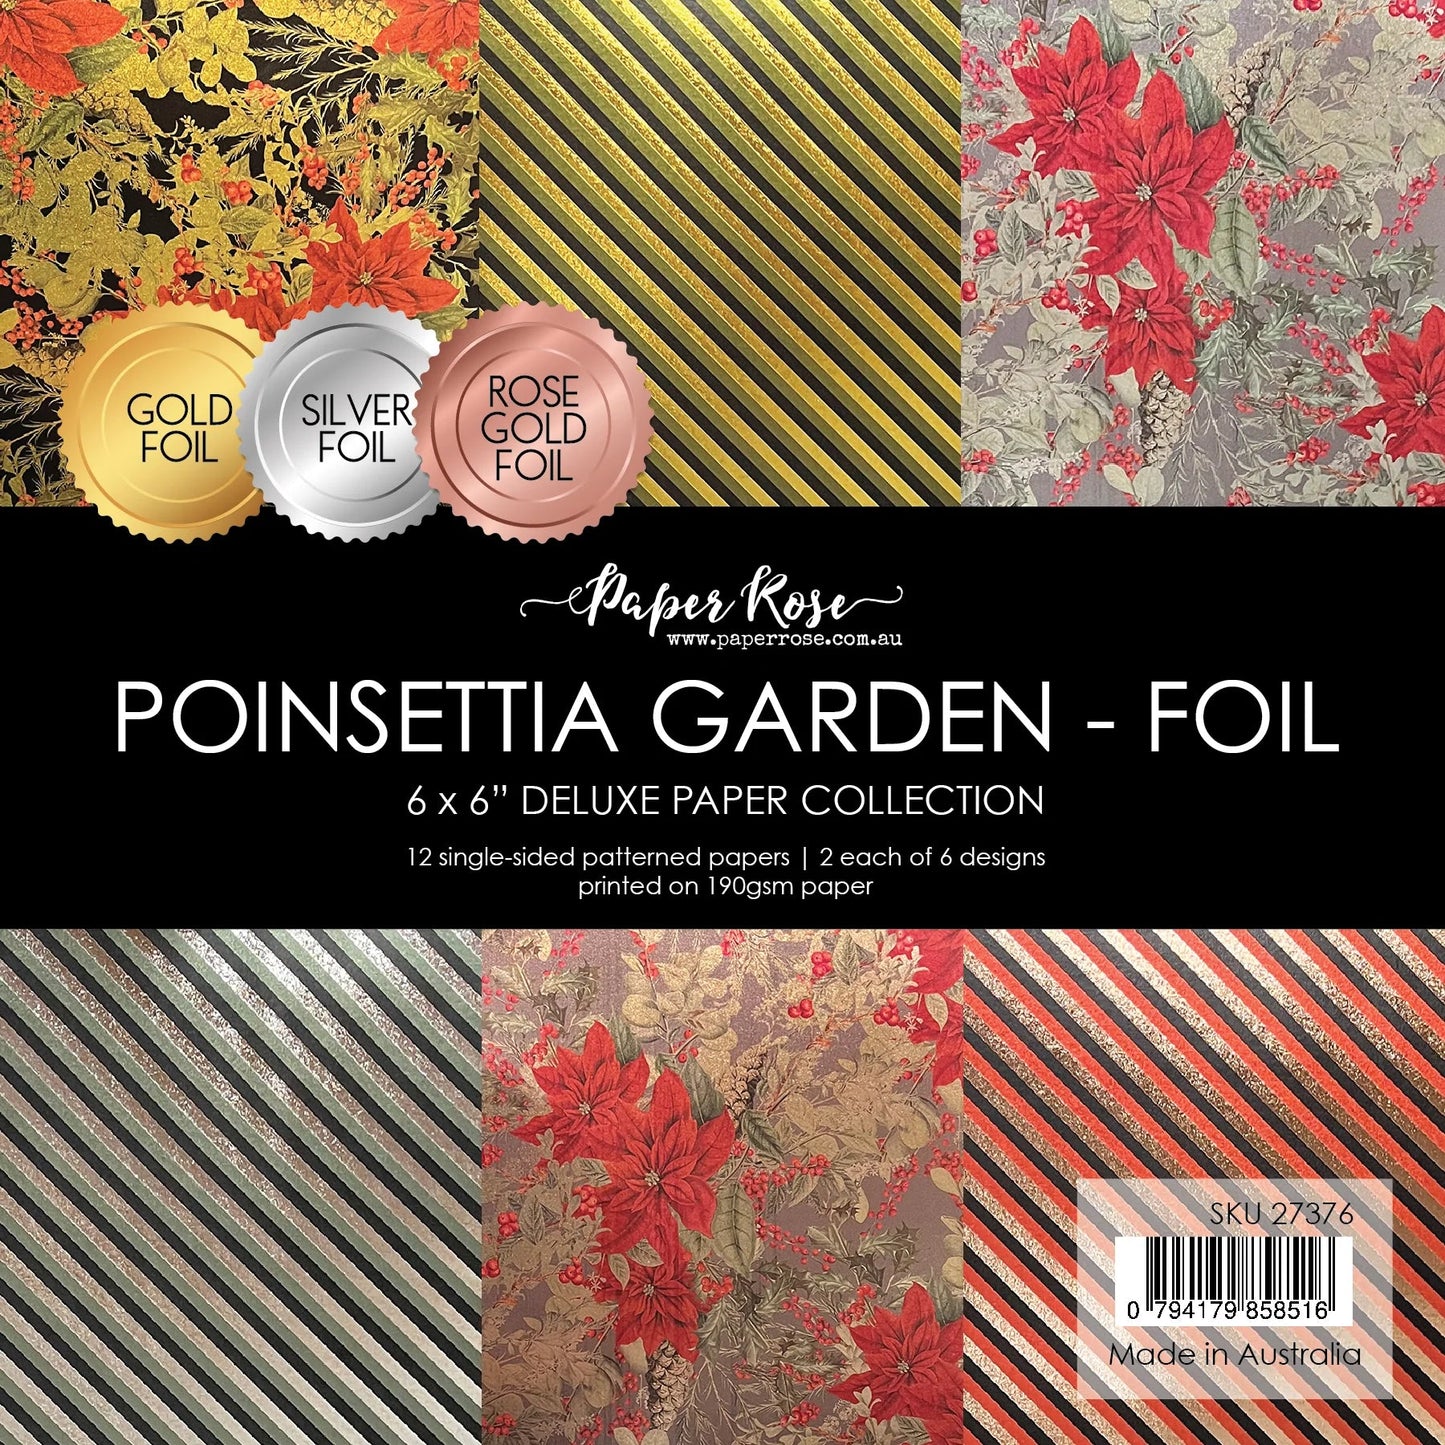 Paper Rose - Poinsettia Garden - Foil 6'x6' Deluxe Paper Collection Arts & Crafts Paper Rose